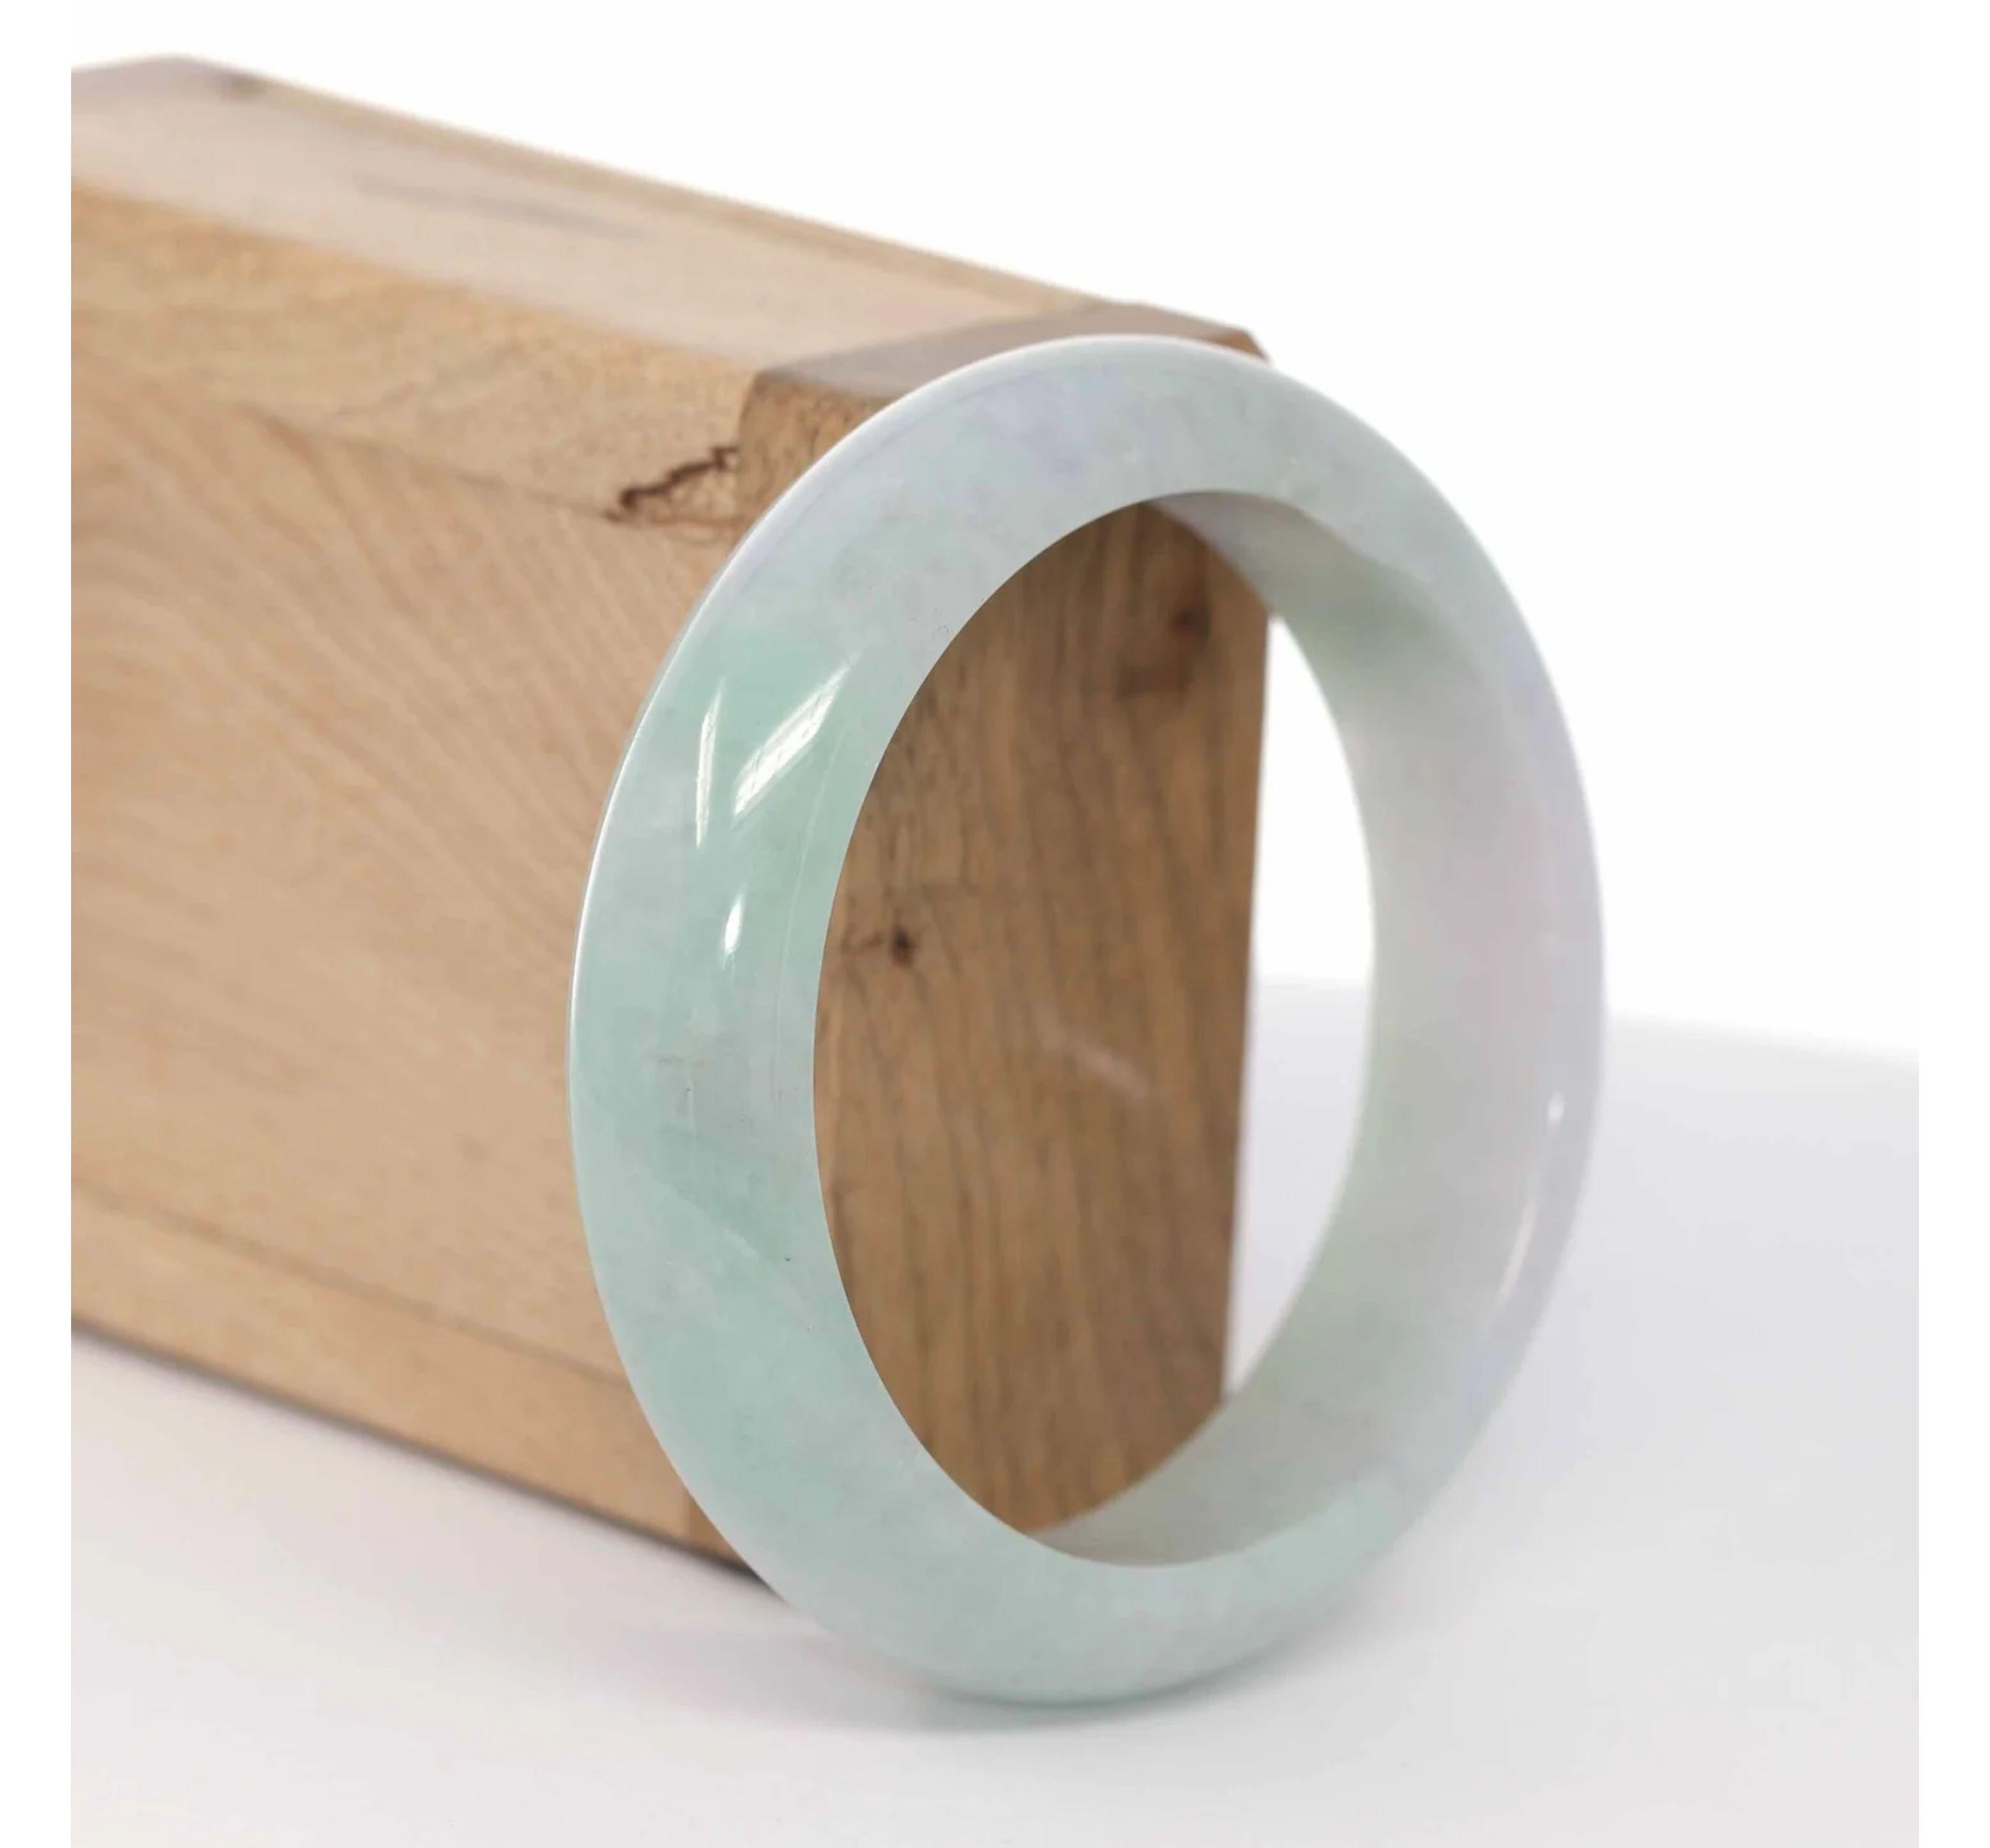 RealJade Co.®RealJade Co.®* DETAILS--- Genuine Burmese Jadeite Jade Bangle Bracelet. This bangle is made with high-quality genuine Burmese ice-green Jadeite jade; the jade texture is so transparent with some green and lavender colors inside. The